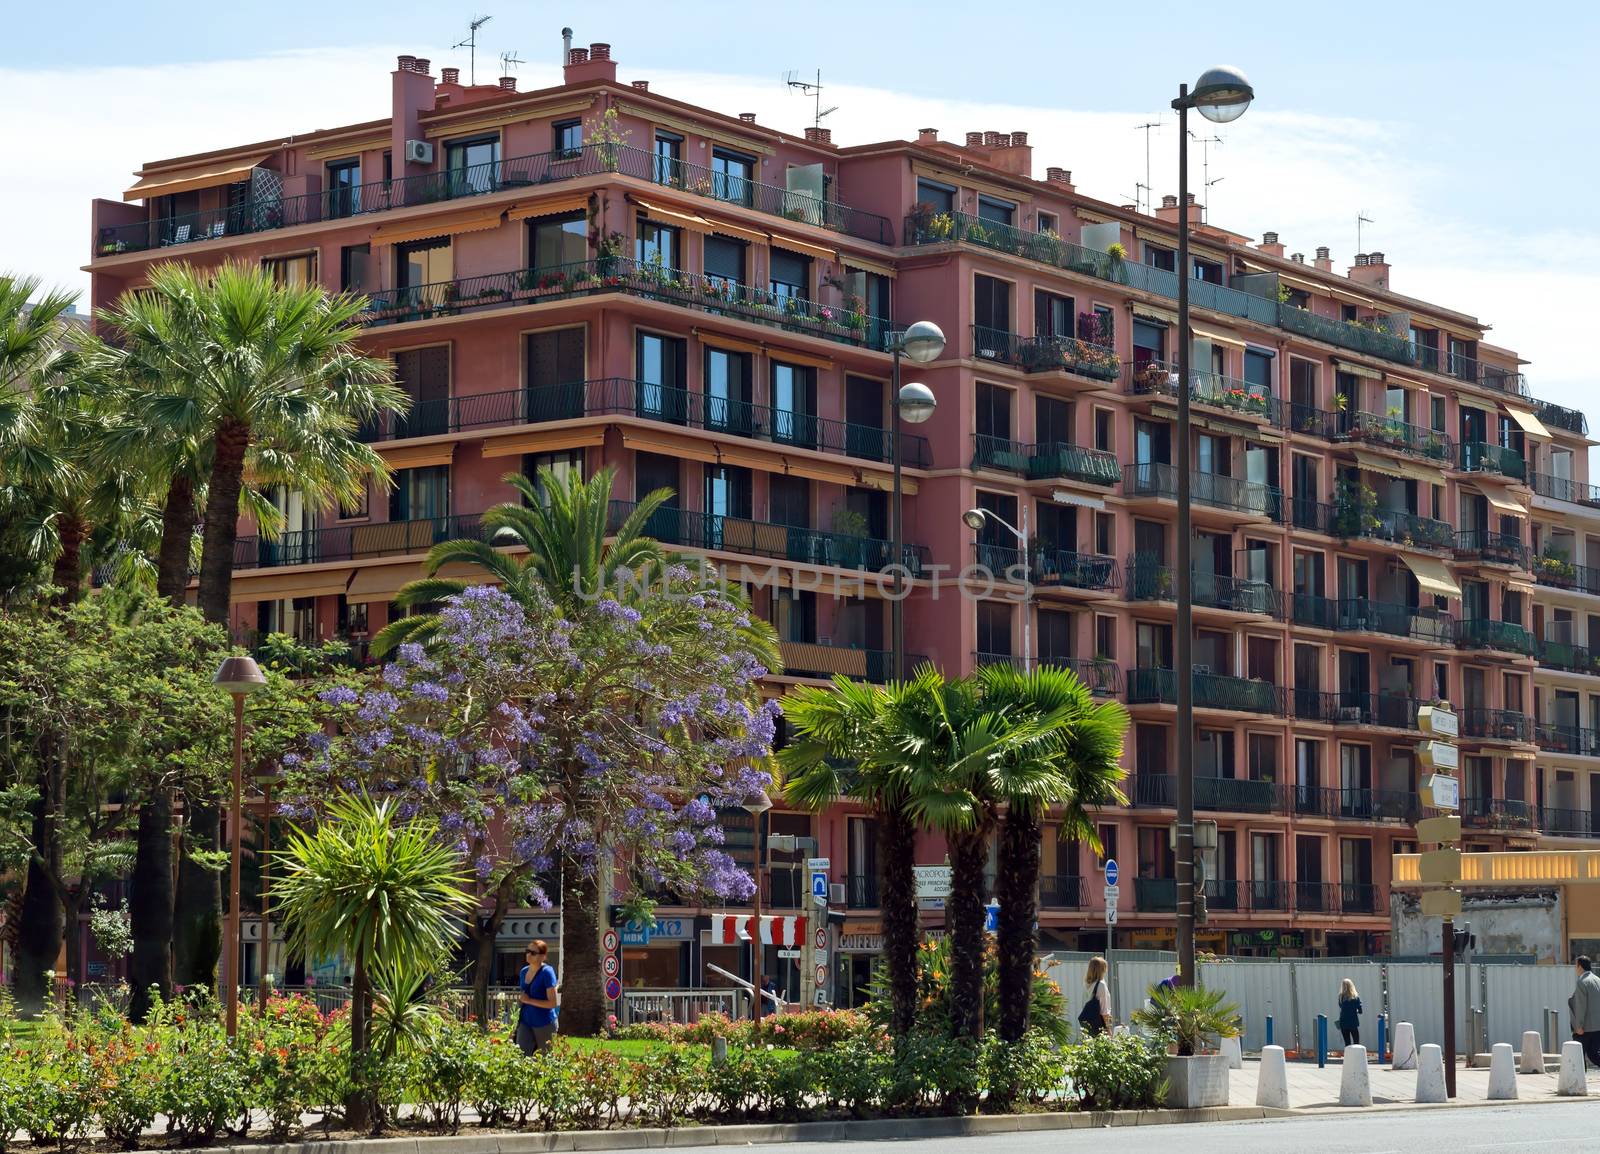 NICE, FRANCE - JUNE 4, 2014: Architecture along Promenade des Anglais. Promenade des Anglais is a symbol of the Cote d'Azur and was built in 1830 at the expense of the British colony.

Nice, France - June 4, 2014: Architecture along Promenade des Anglais. Promenade des Anglais is a symbol of the Cote d'Azur and was built in 1830 at the expense of the British colony. People are walking by street.